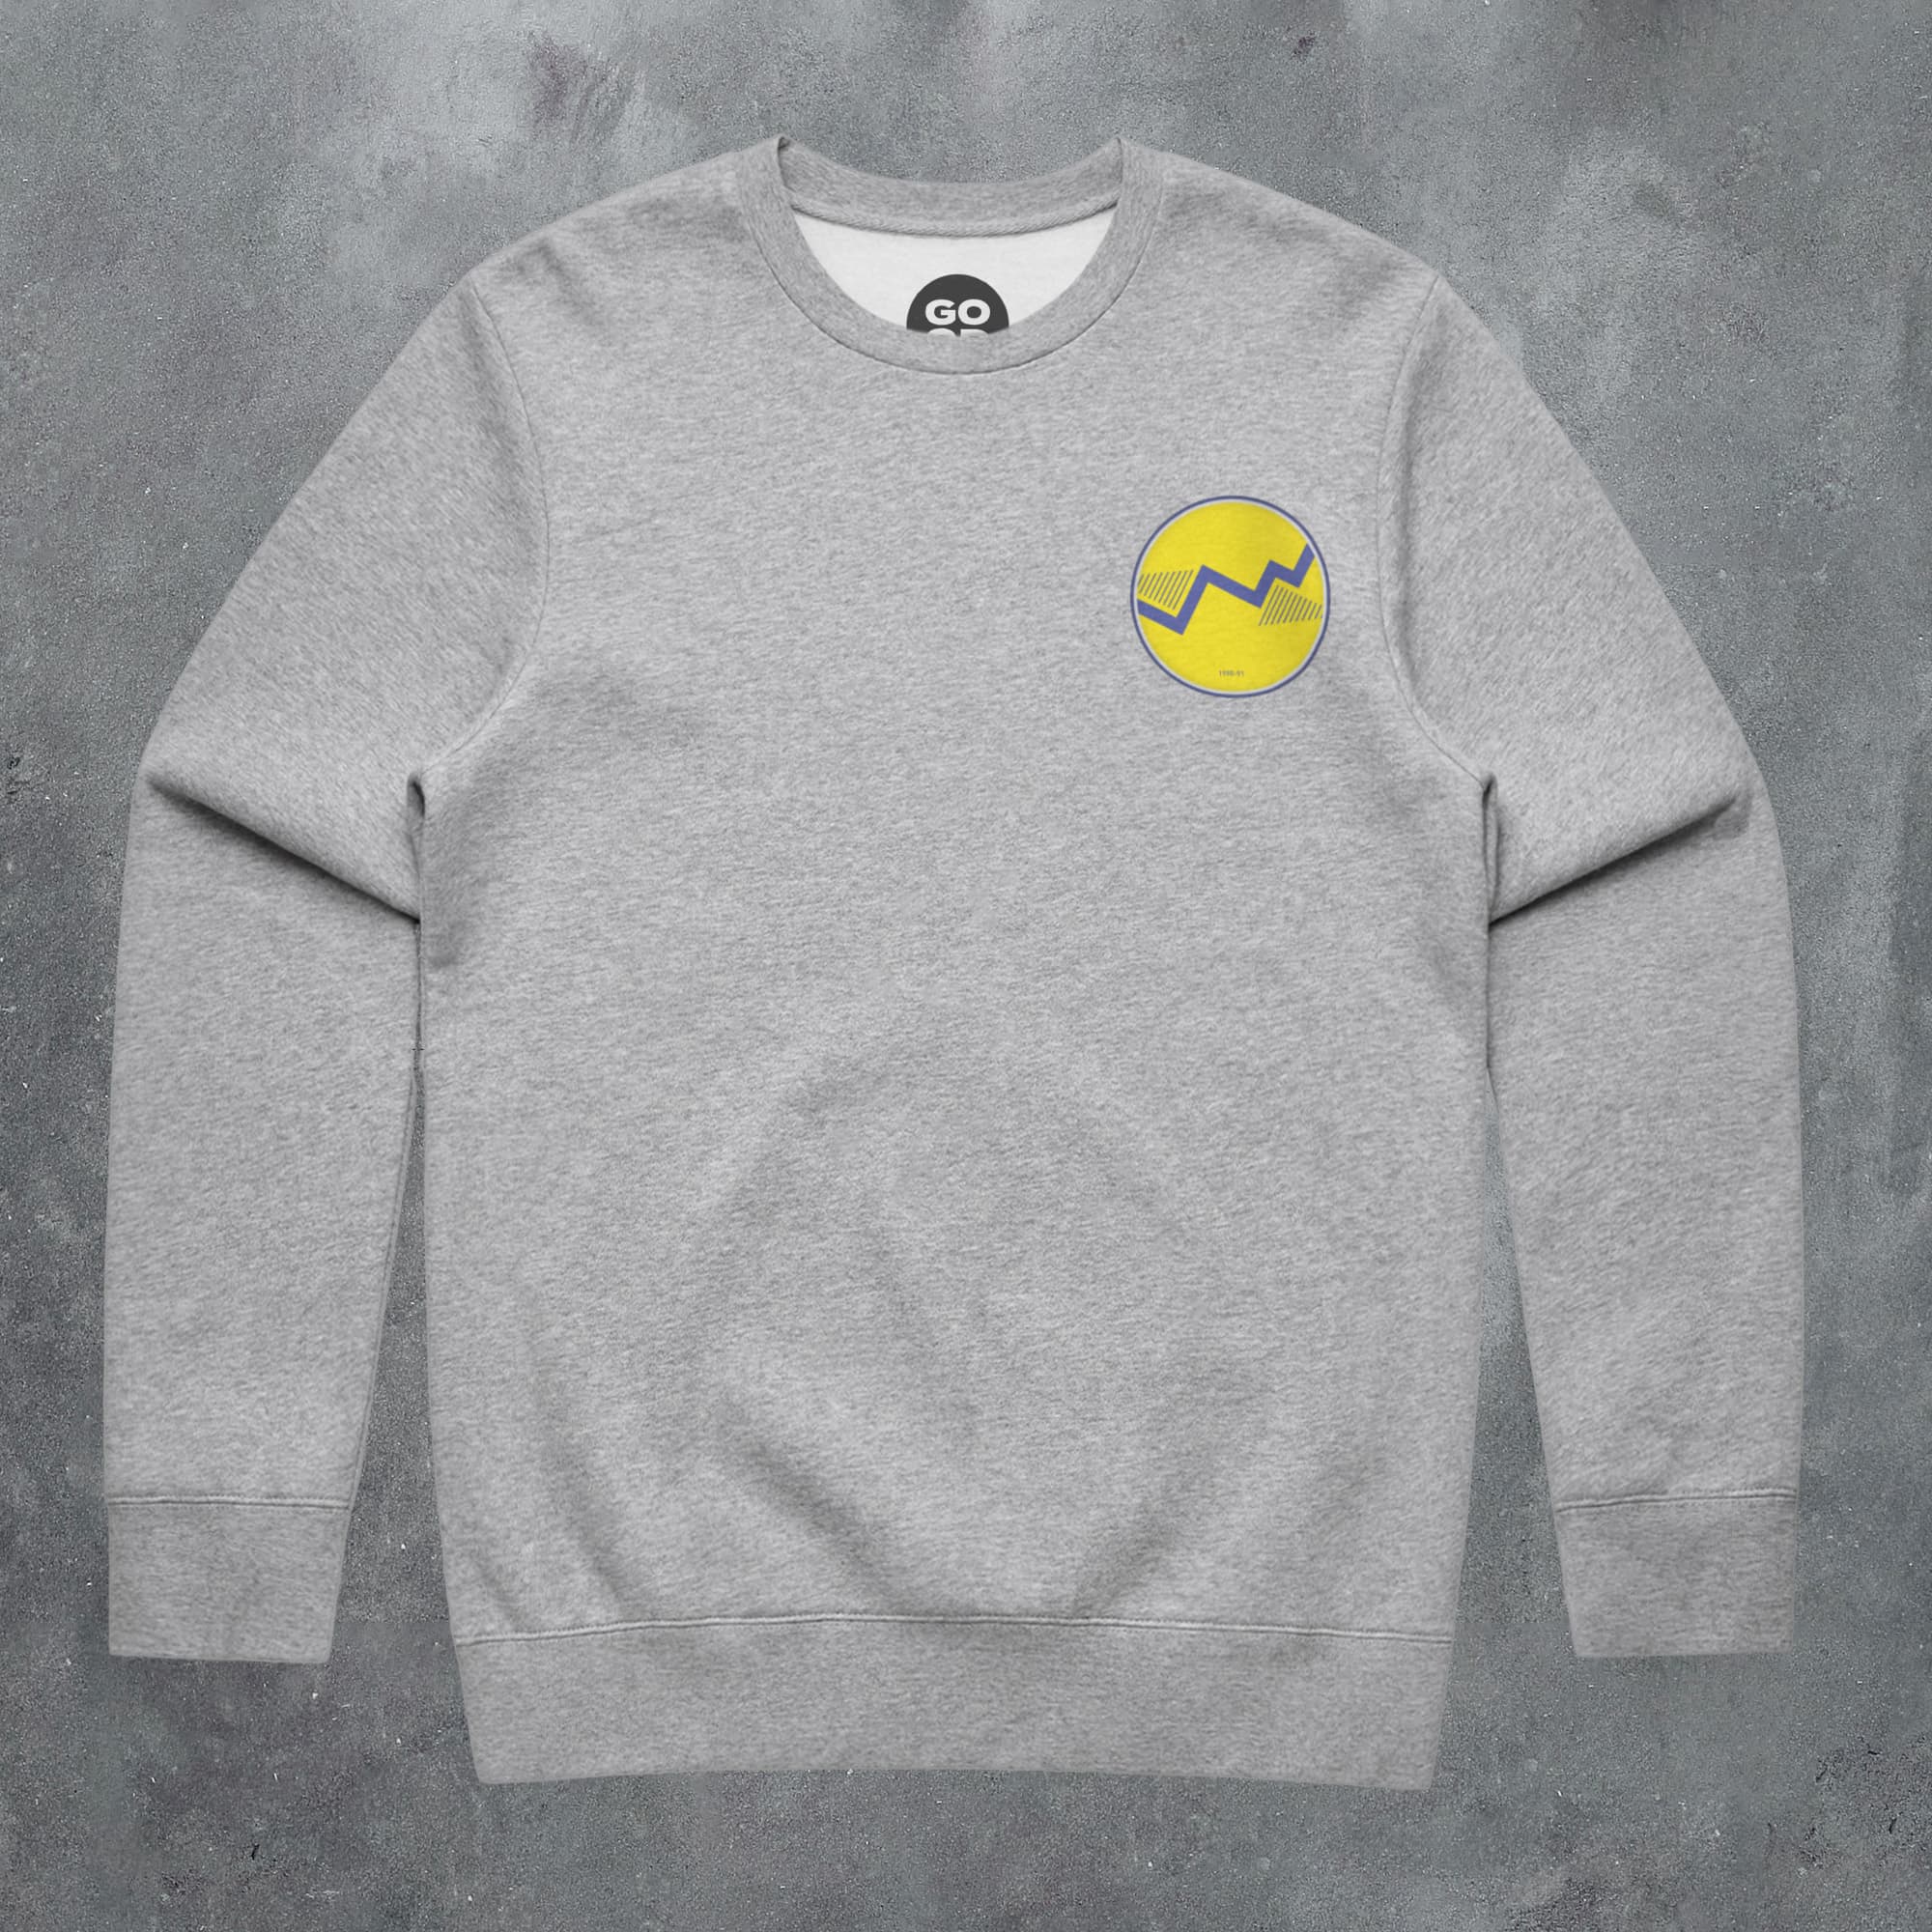 a grey sweatshirt with a yellow smiley face on it